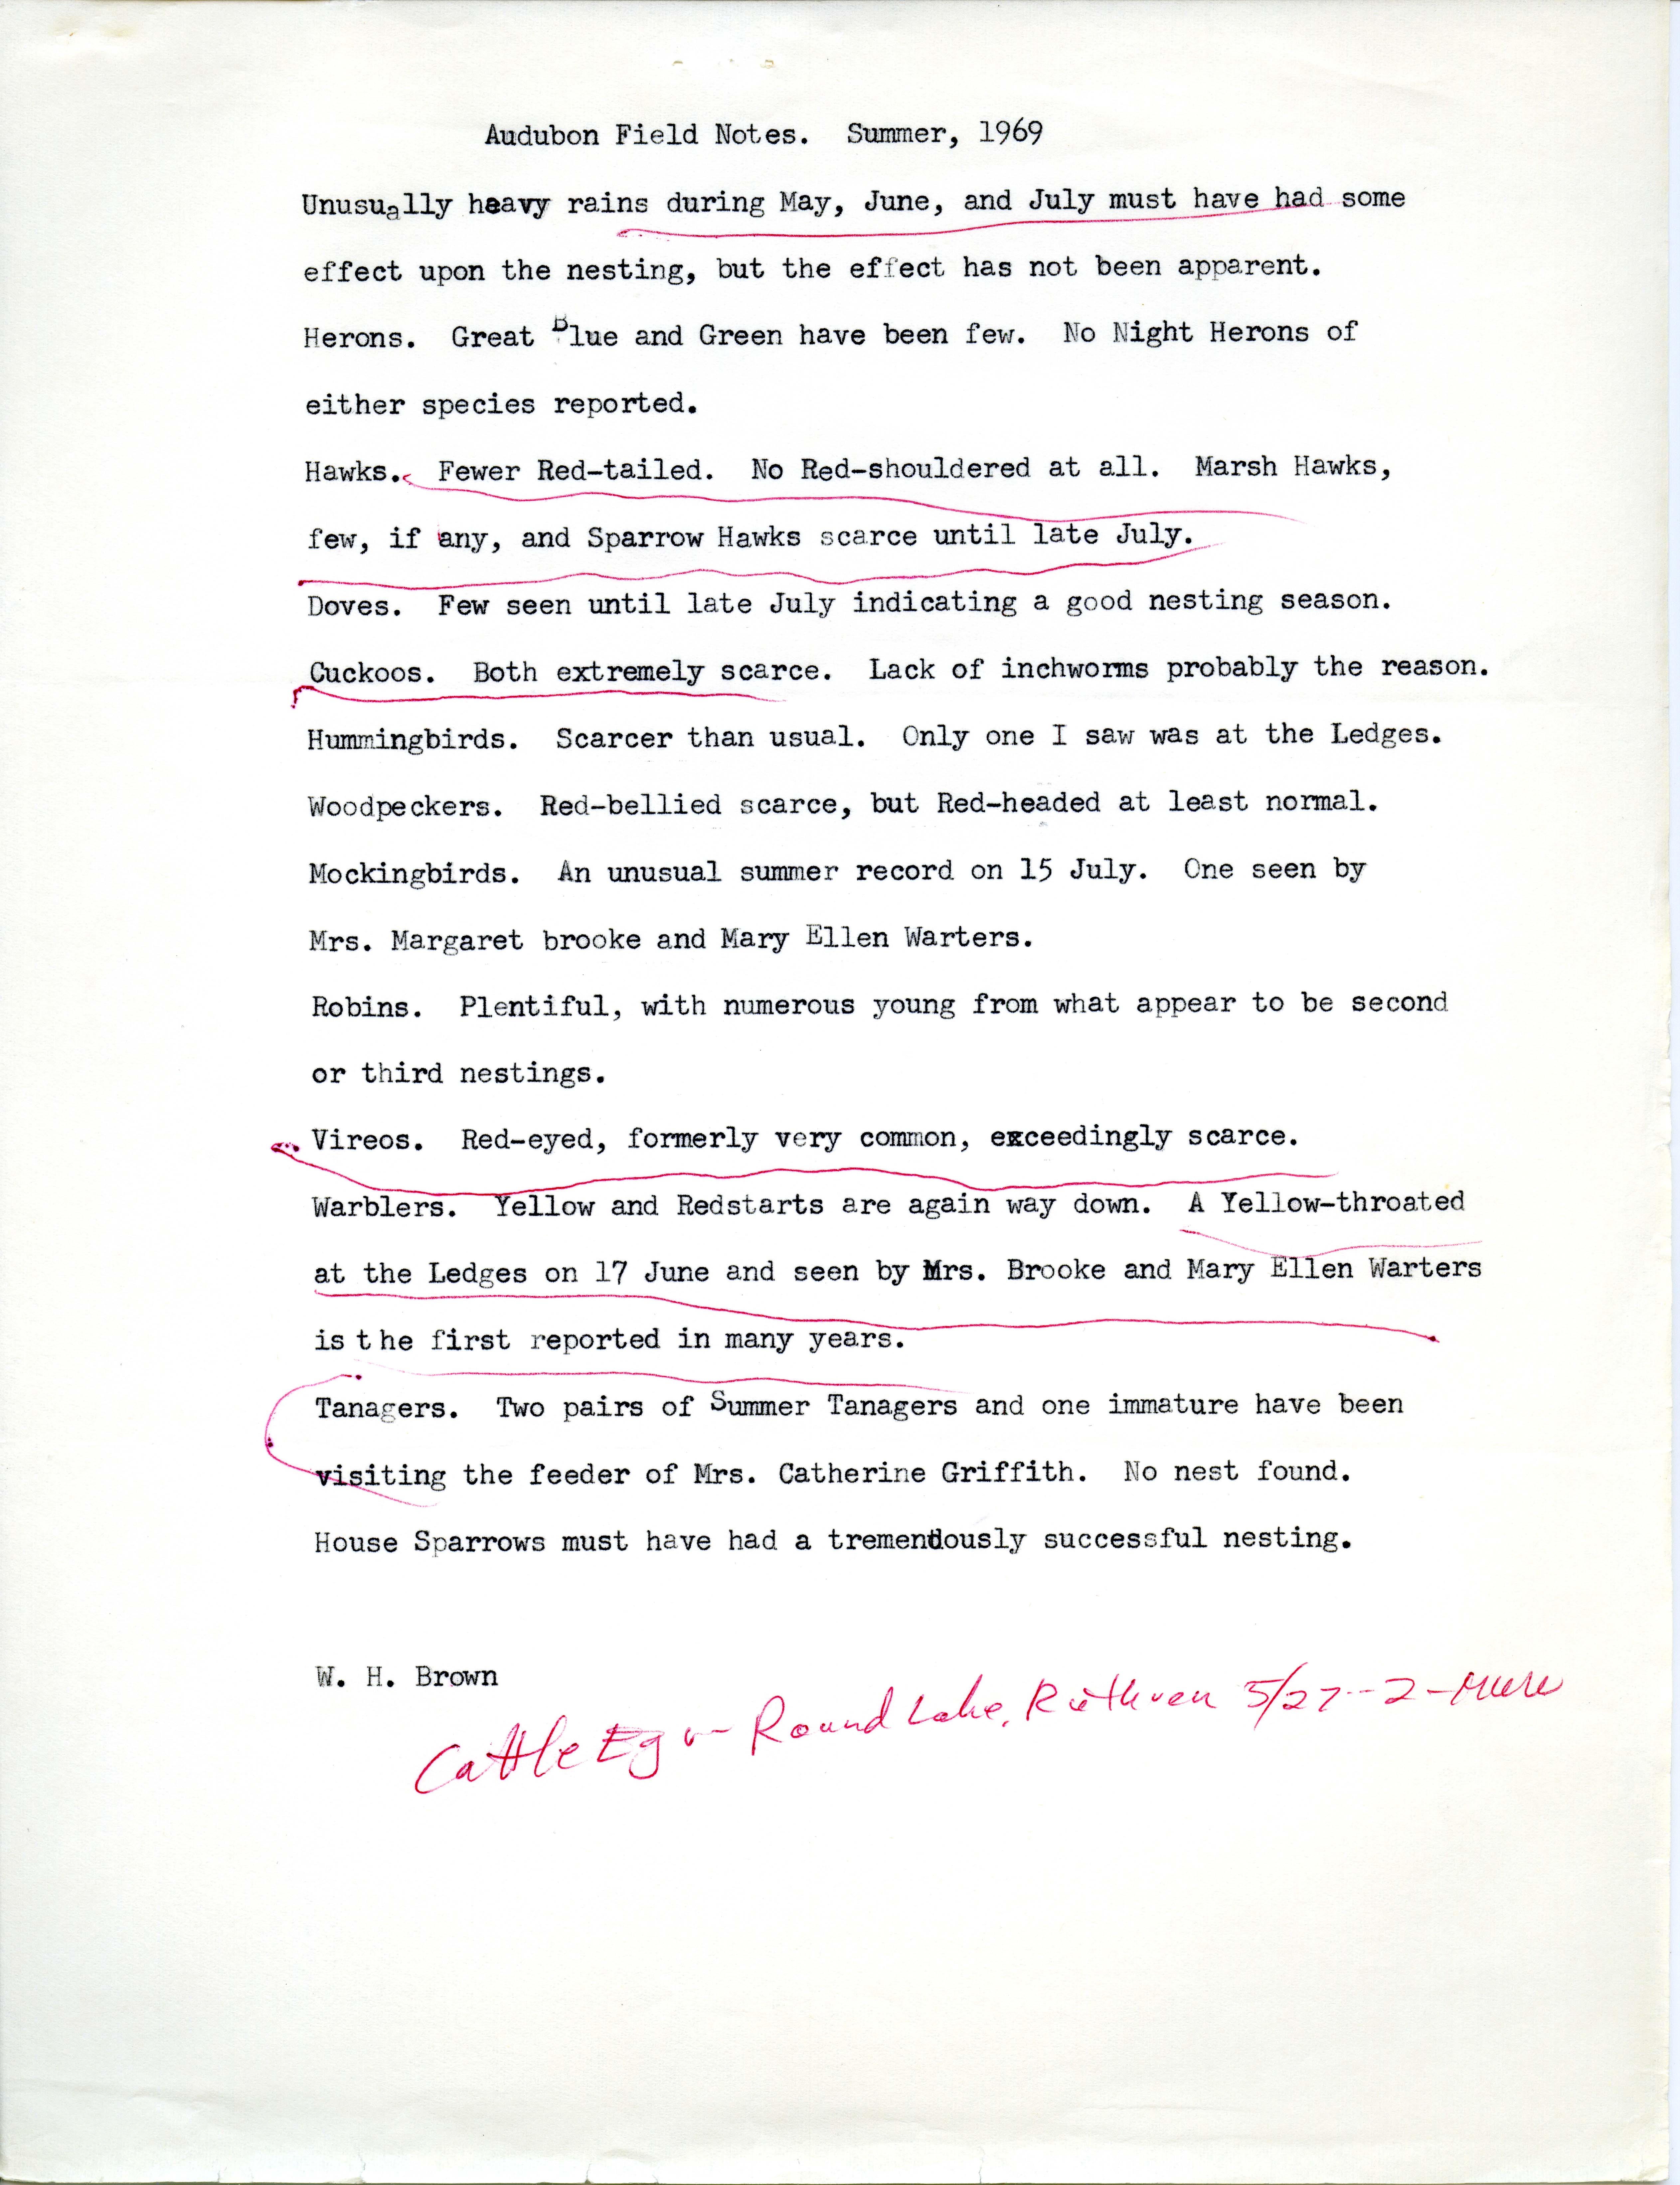 Audubon field notes, summer 1969, and R.G. Cortelyou letter to Peter C. Petersen regarding a Western Tanager, August 7, 1969